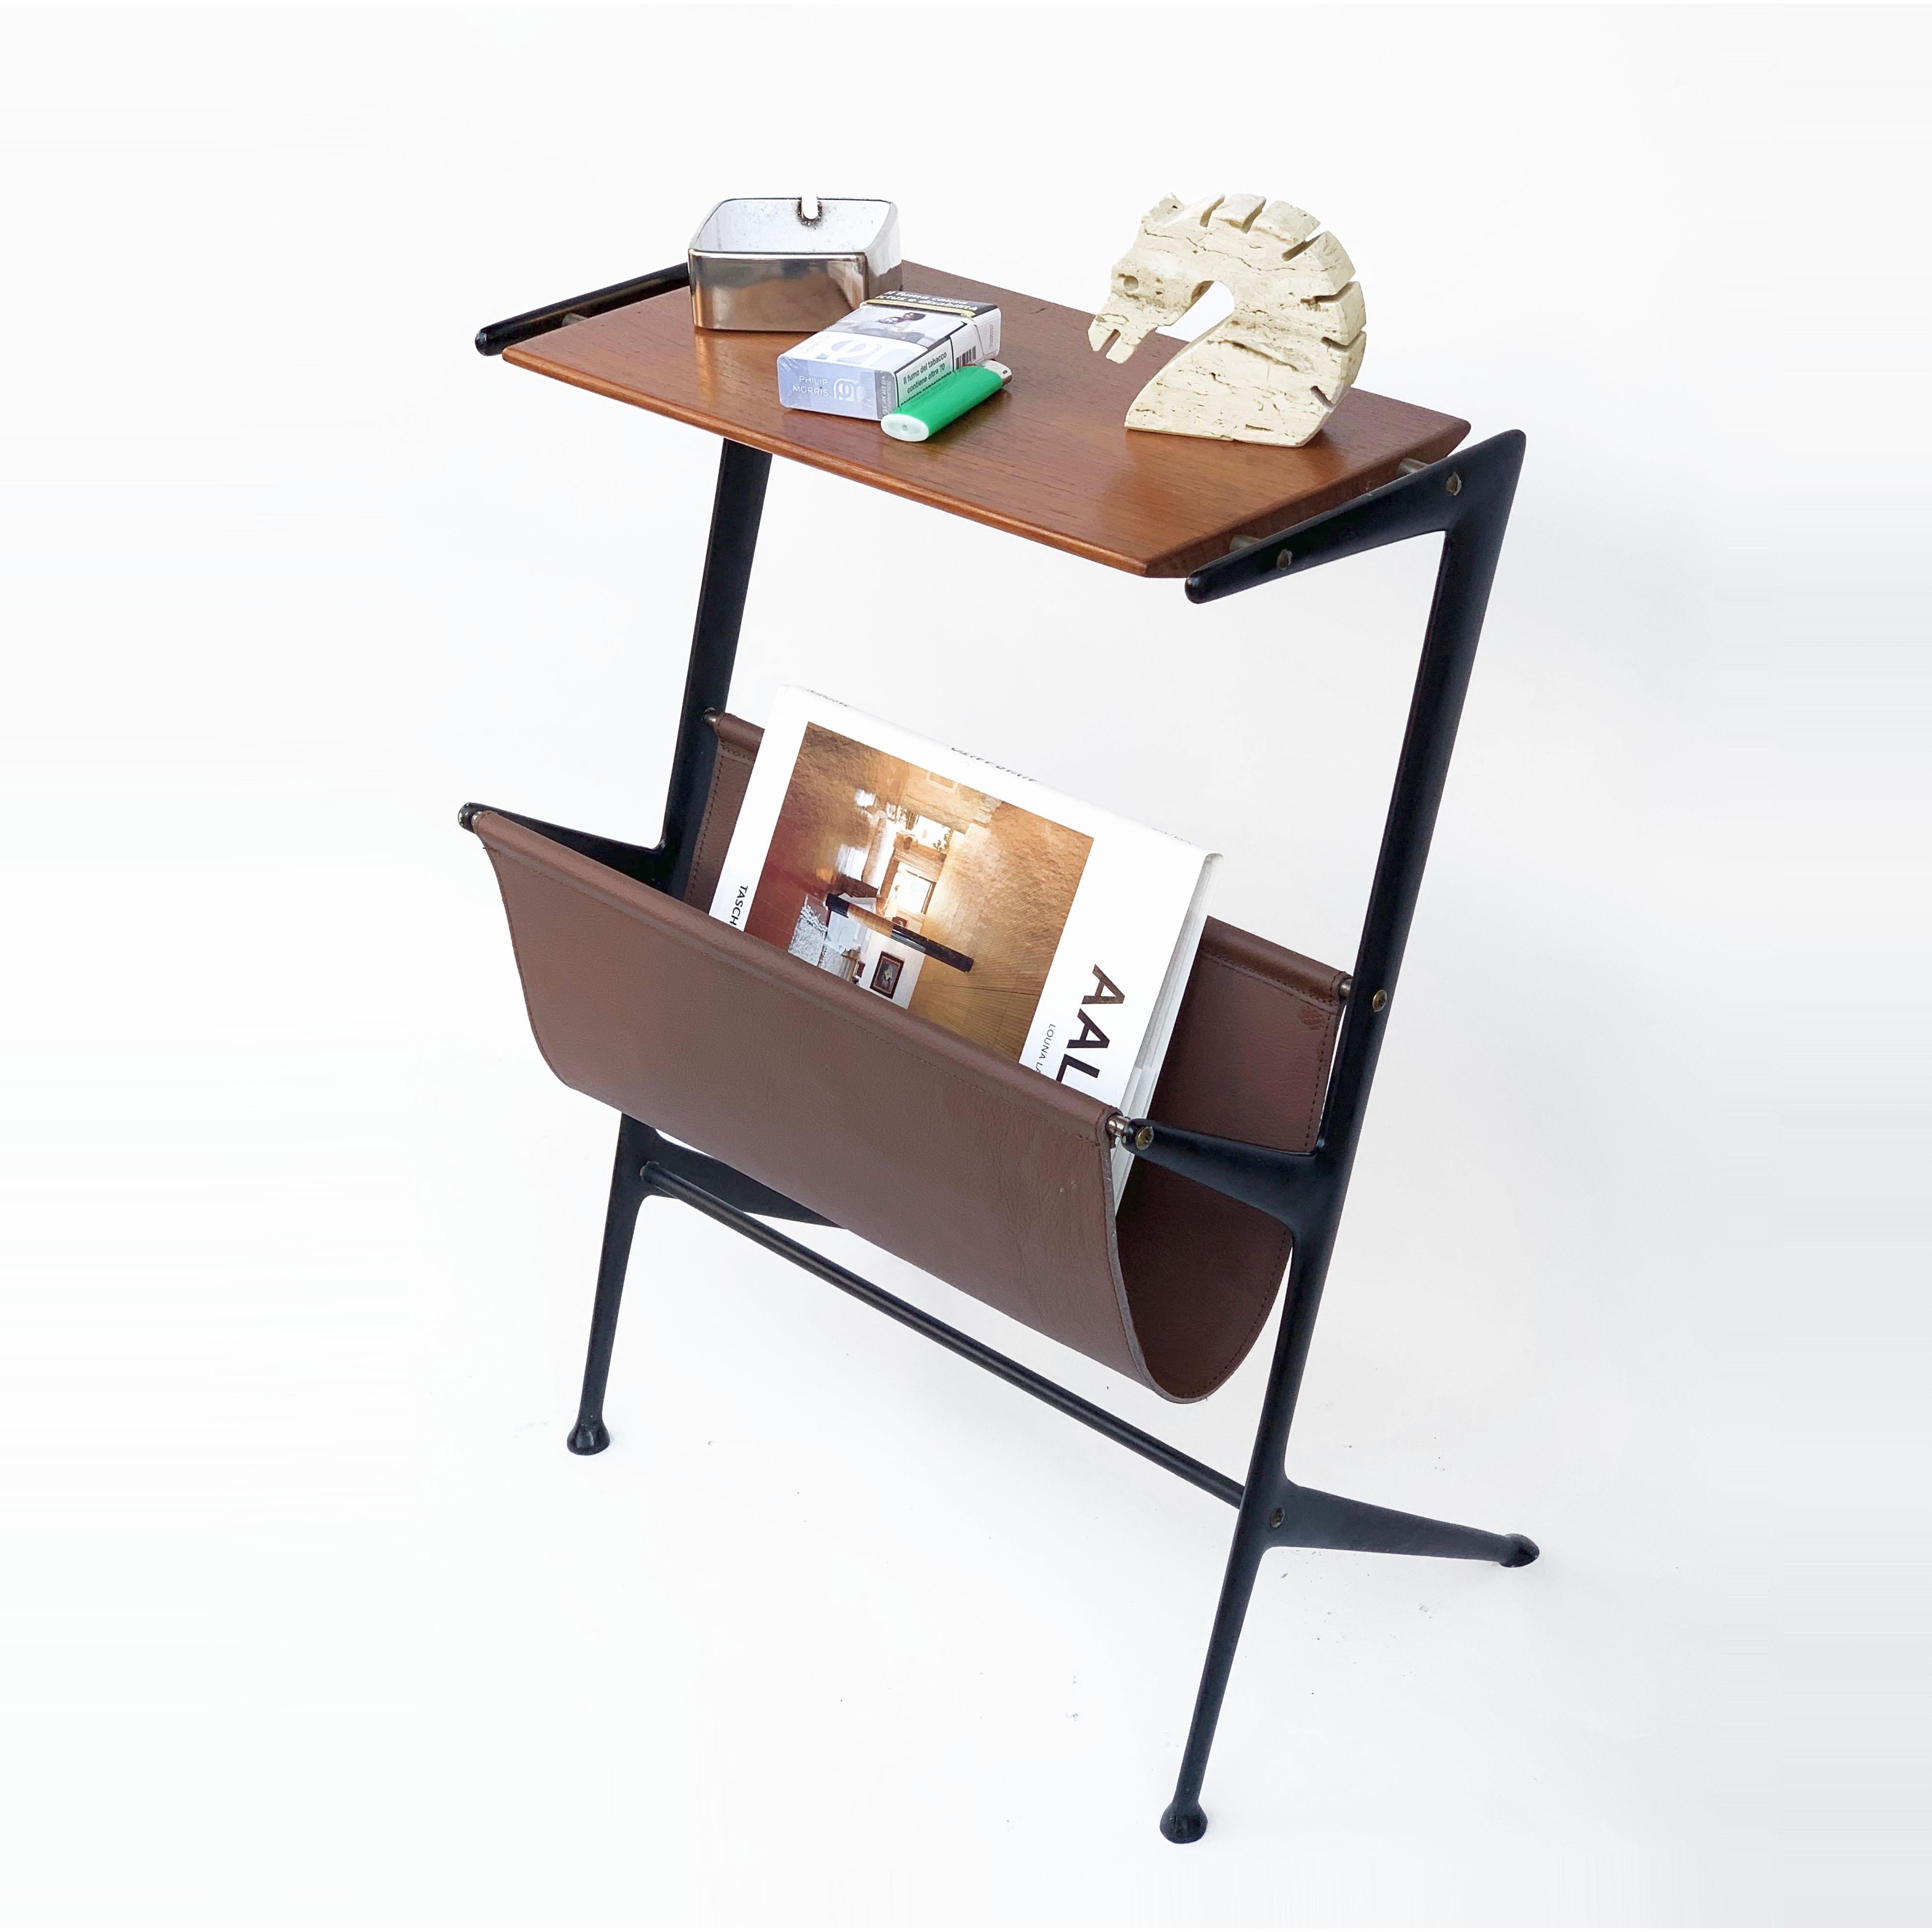 Wonderful and rare table rack. Attributable to Ico Parisi, an Italian coffee table from the 1950s. Enamelled metal structure, shaped wood top, leather magazine rack.
A wonderful piece.

Totally removable and easy to assemble.